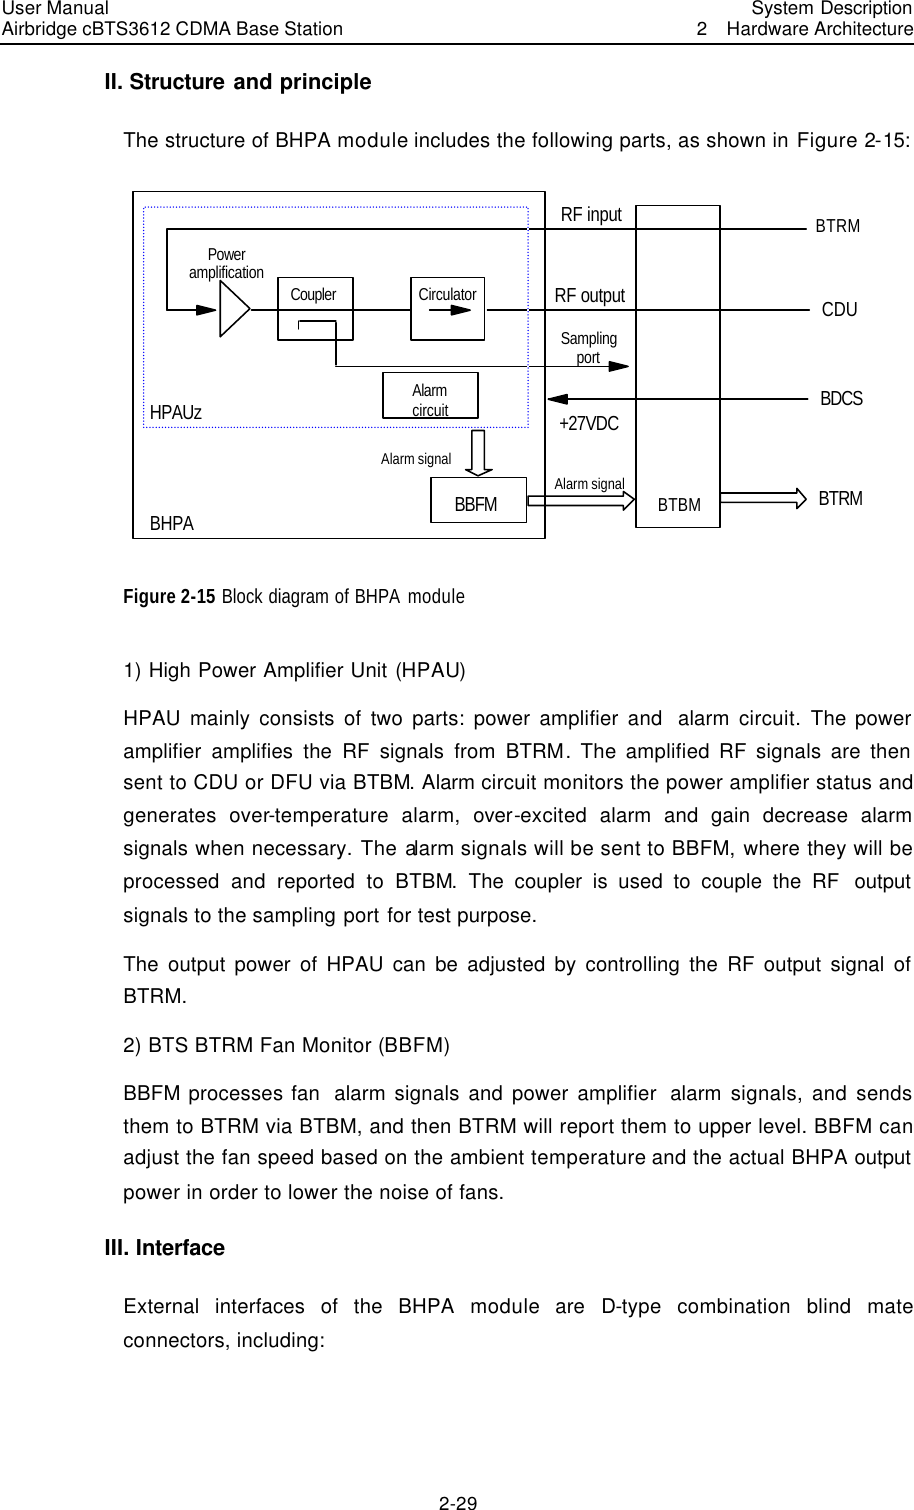 User Manual Airbridge cBTS3612 CDMA Base Station   System Description2  Hardware Architecture 2-29 II. Structure and principle The structure of BHPA module includes the following parts, as shown in Figure 2-15:   RF inputCouplerPower amplification RF outputBTBMCDUBTRMBBFMBDCSSampling port+27VDCBHPAAlarm signalAlarm signalAlarm circuitBTRMCirculatorHPAUz Figure 2-15 Block diagram of BHPA module 1) High Power Amplifier Unit (HPAU) HPAU mainly consists of two parts: power amplifier and  alarm circuit.  The power amplifier amplifies the RF signals from BTRM. The amplified RF signals are then sent to CDU or DFU via BTBM. Alarm circuit monitors the power amplifier status and generates over-temperature  alarm,  over-excited  alarm and gain decrease alarm signals when necessary. The alarm signals will be sent to BBFM, where they will be processed and reported to BTBM.  The coupler is used to couple the RF  output  signals to the sampling port for test purpose. The output power of HPAU can be adjusted by controlling the RF output signal of BTRM. 2) BTS BTRM Fan Monitor (BBFM) BBFM processes fan  alarm signals and power amplifier  alarm signals, and sends them to BTRM via BTBM, and then BTRM will report them to upper level. BBFM can adjust the fan speed based on the ambient temperature and the actual BHPA output  power in order to lower the noise of fans. III. Interface External interfaces of the BHPA module are D-type combination blind mate connectors, including: 